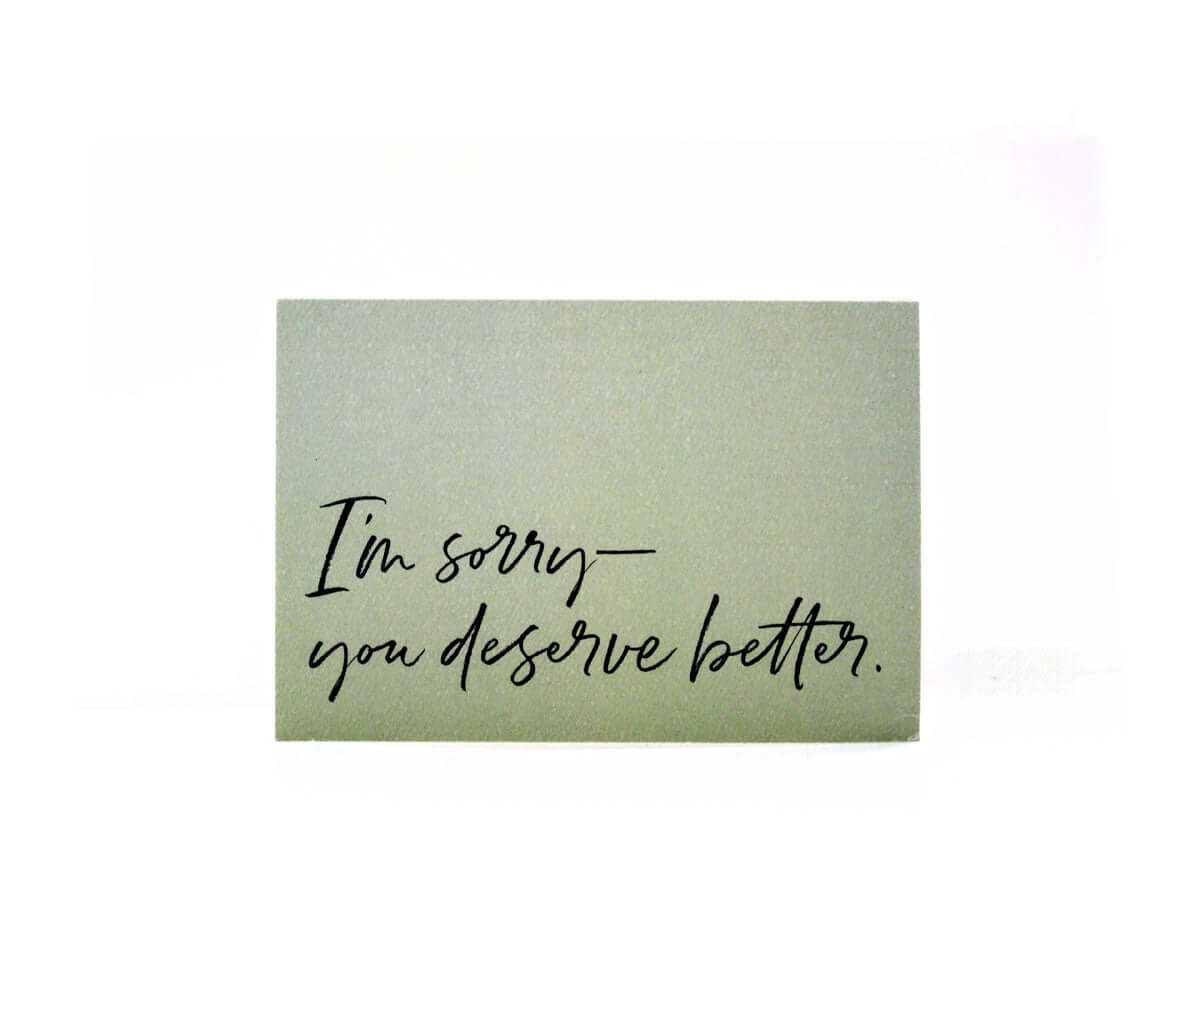 green horizontal card that reads "Im sorry- you deserve better" in black cursive text